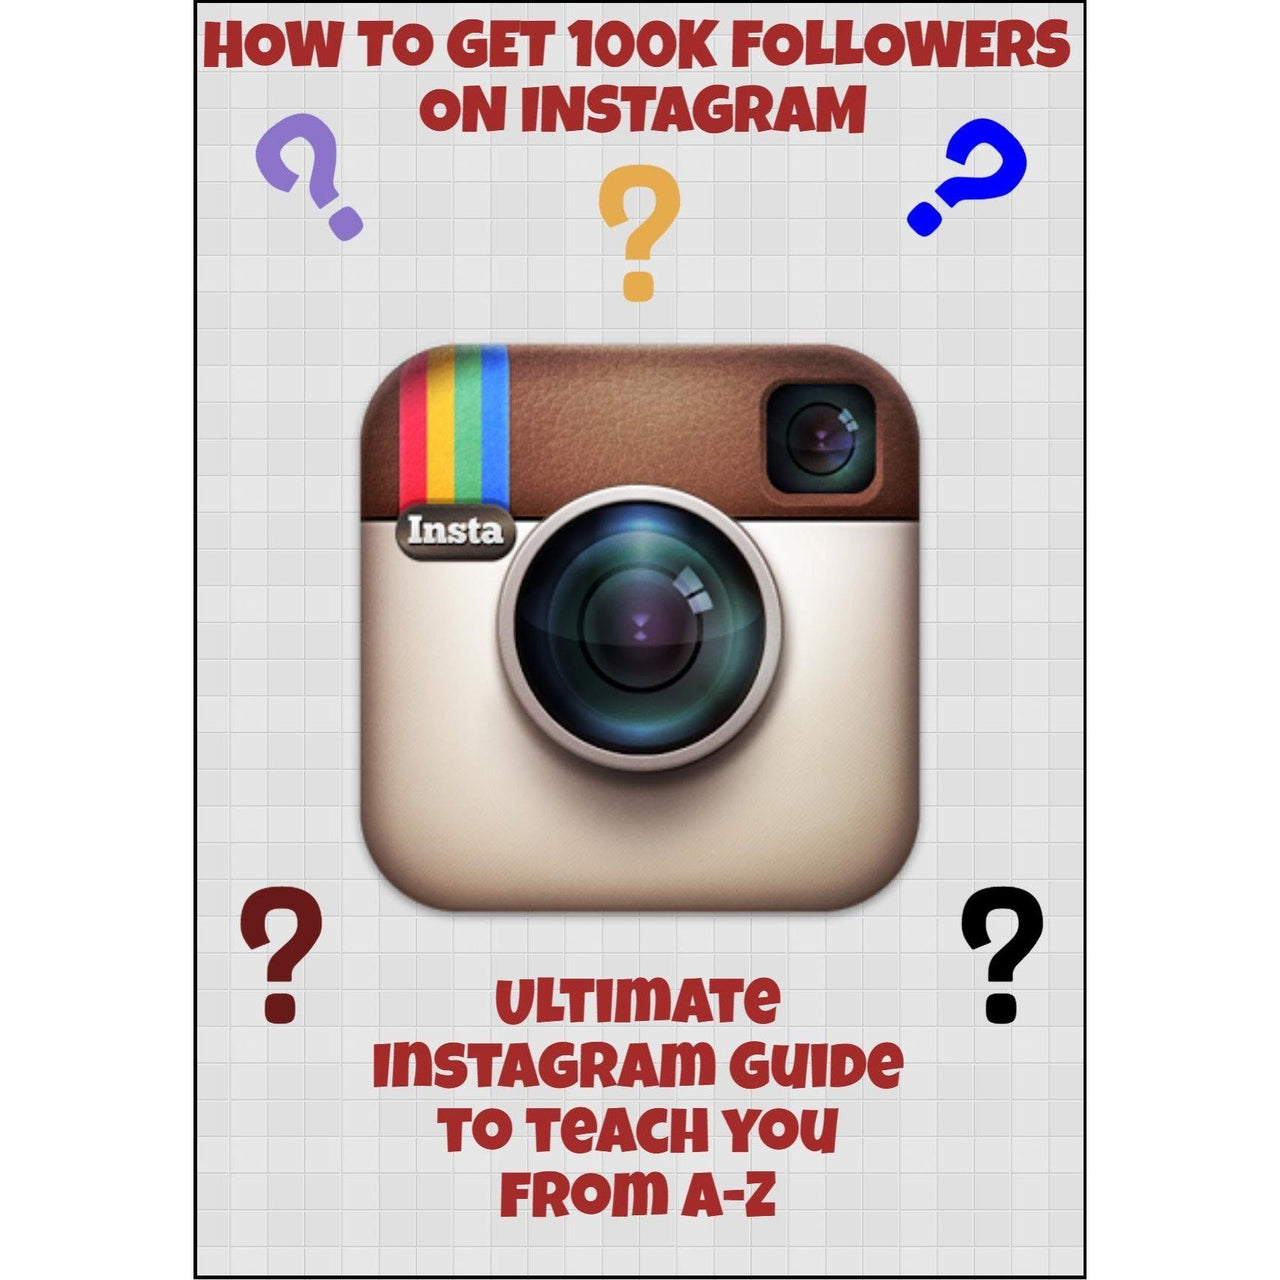 How to Get 100k Followers on Instagram